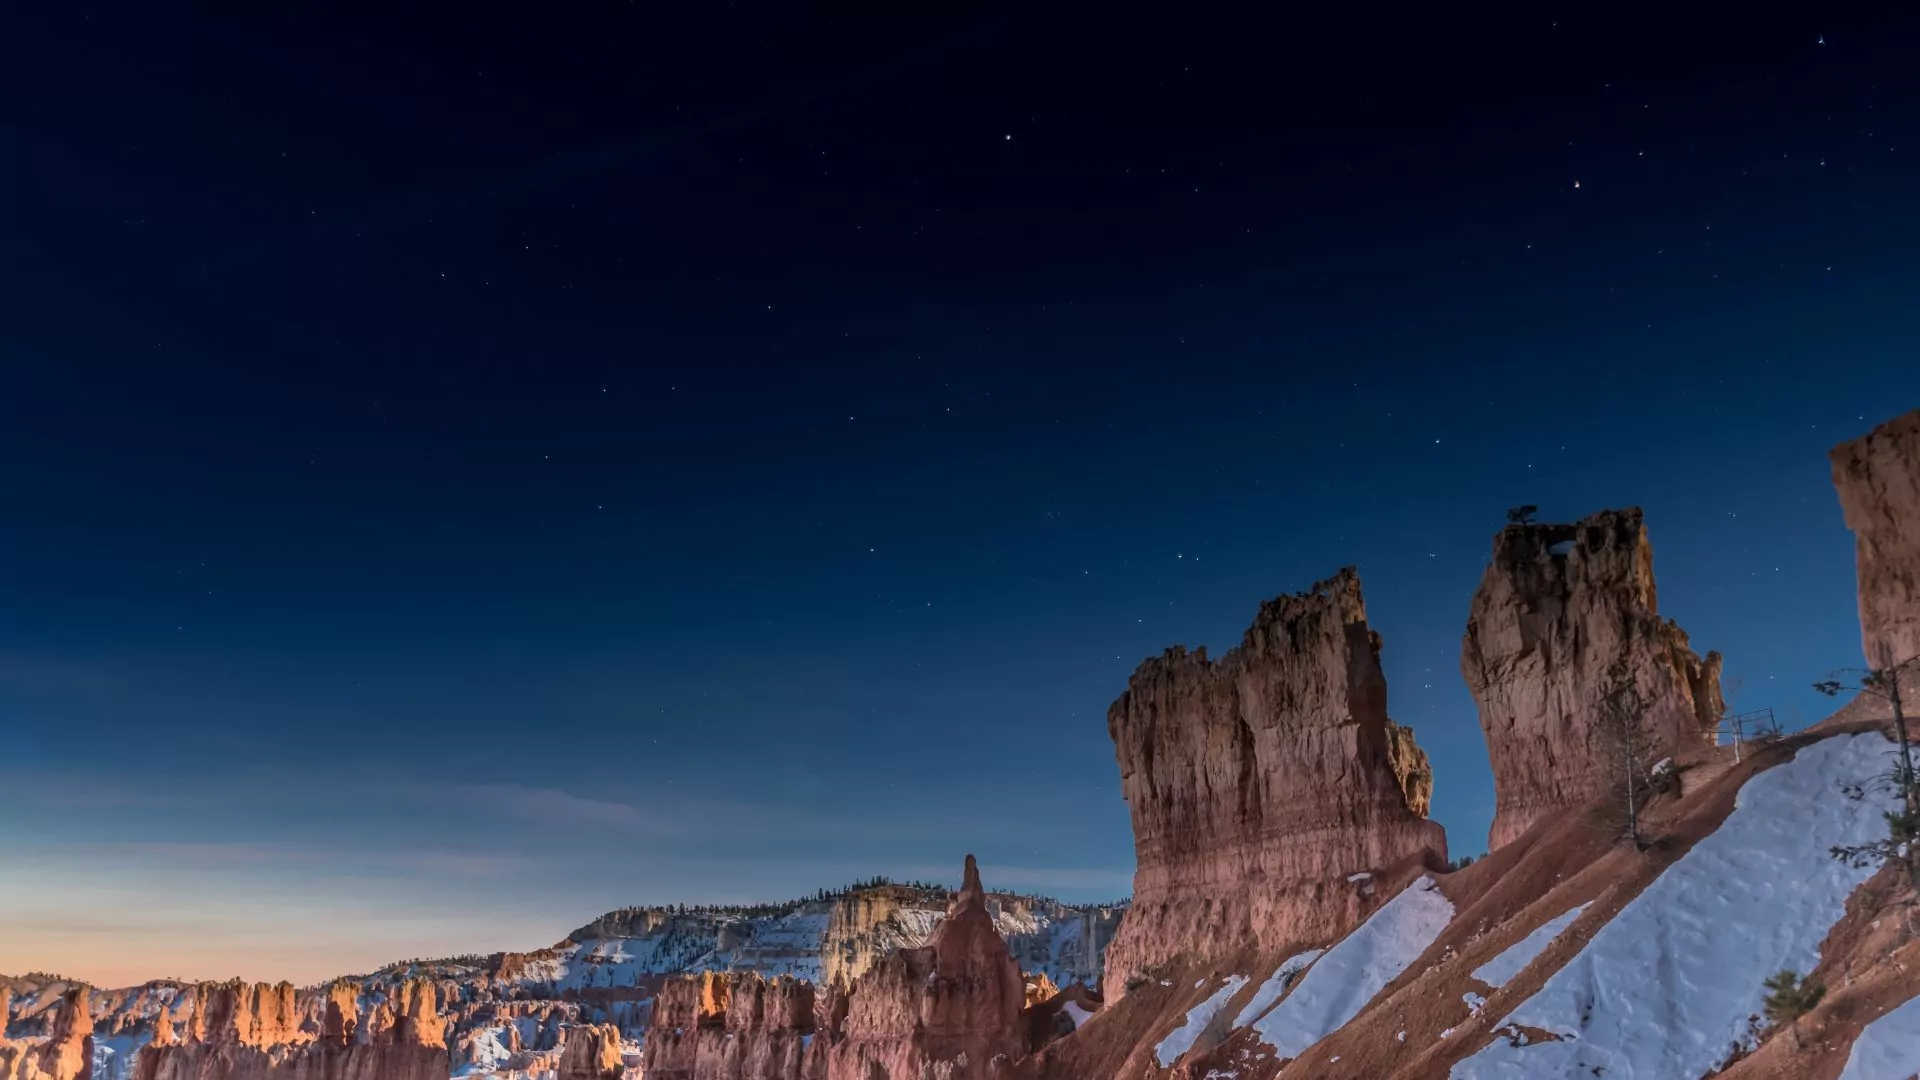 Bryce canyon national park stars start to come out at night